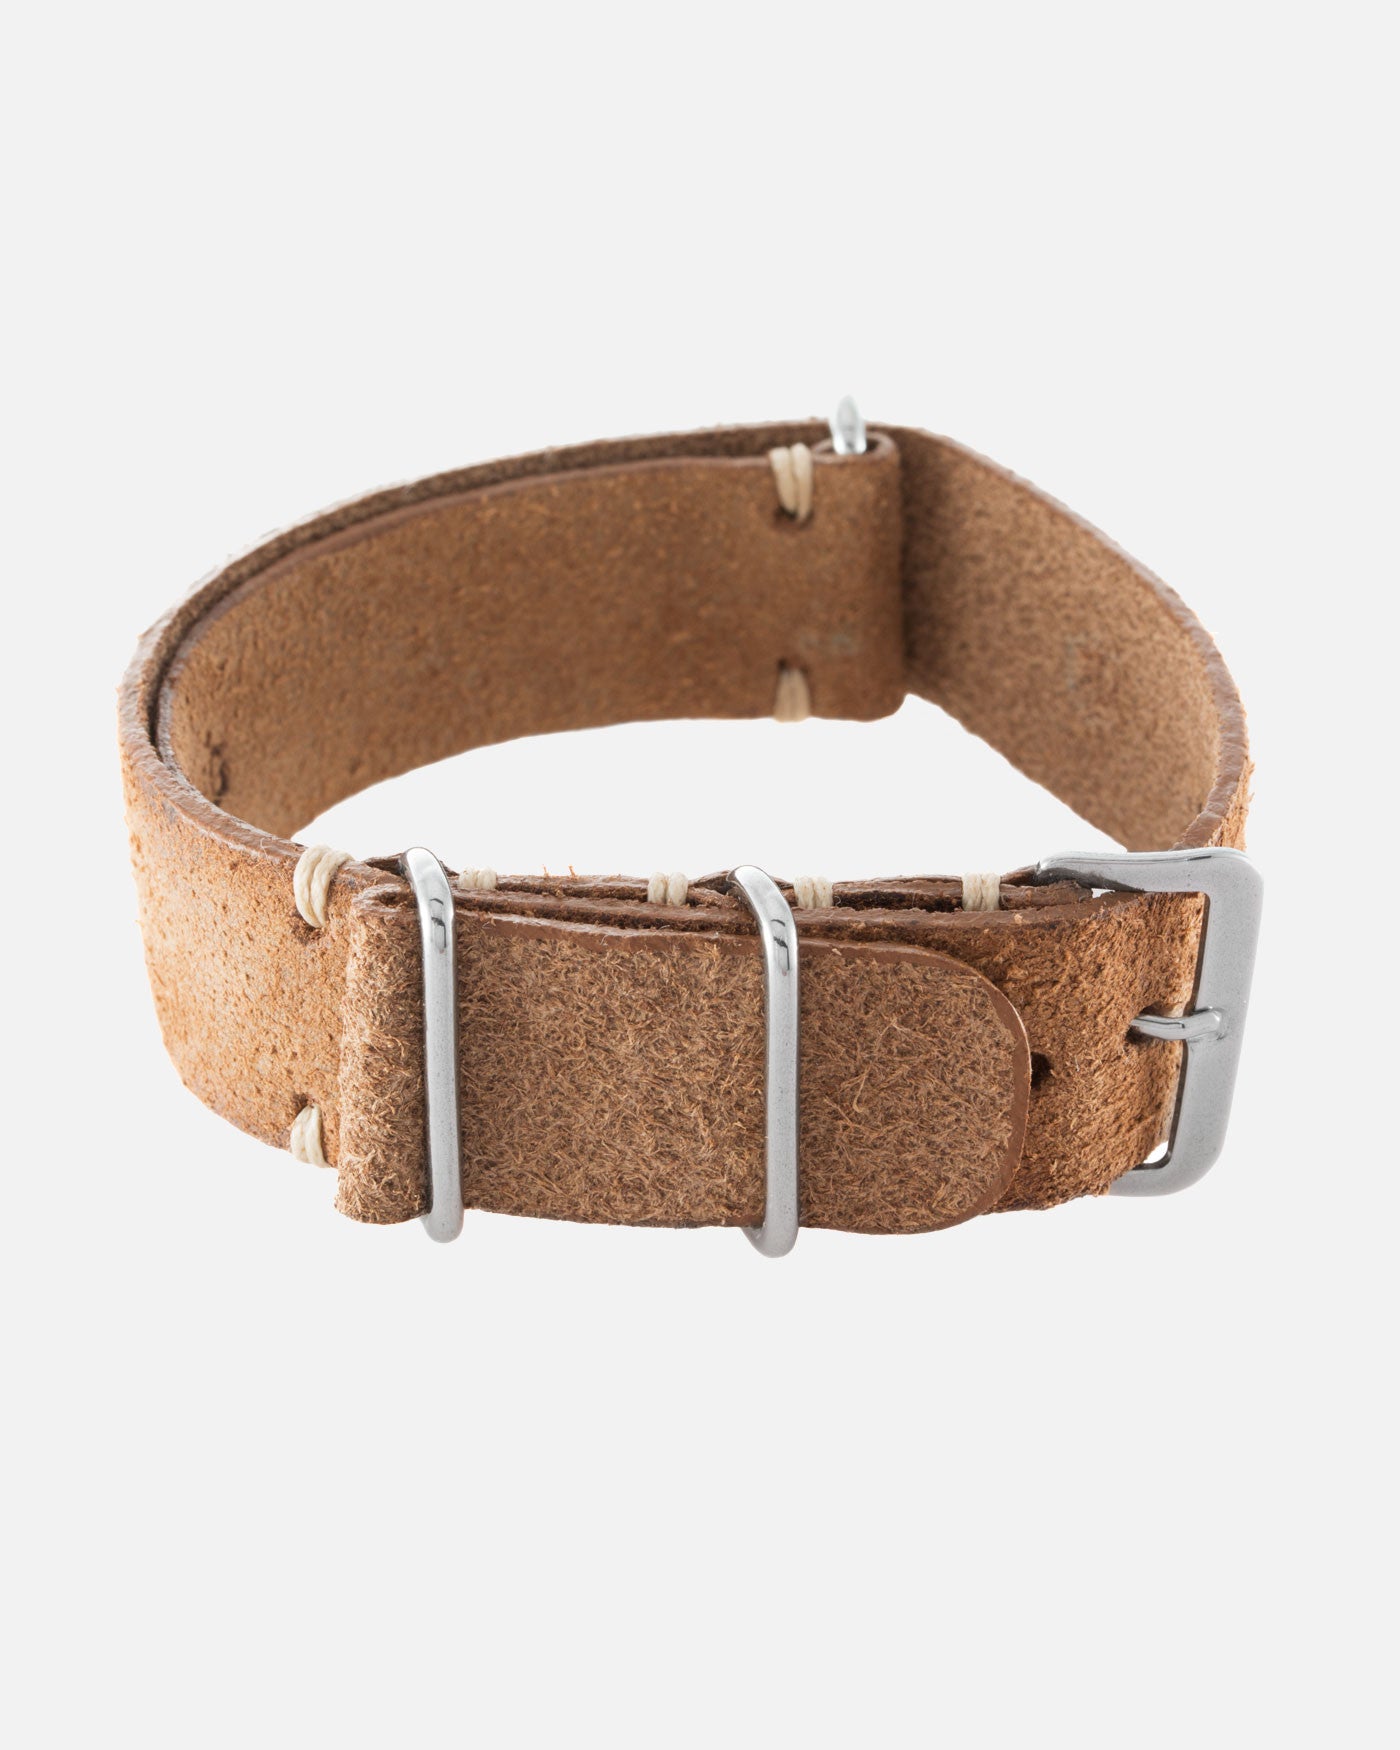 JPM X S.Song Sand Brown Distressed Leather NATO